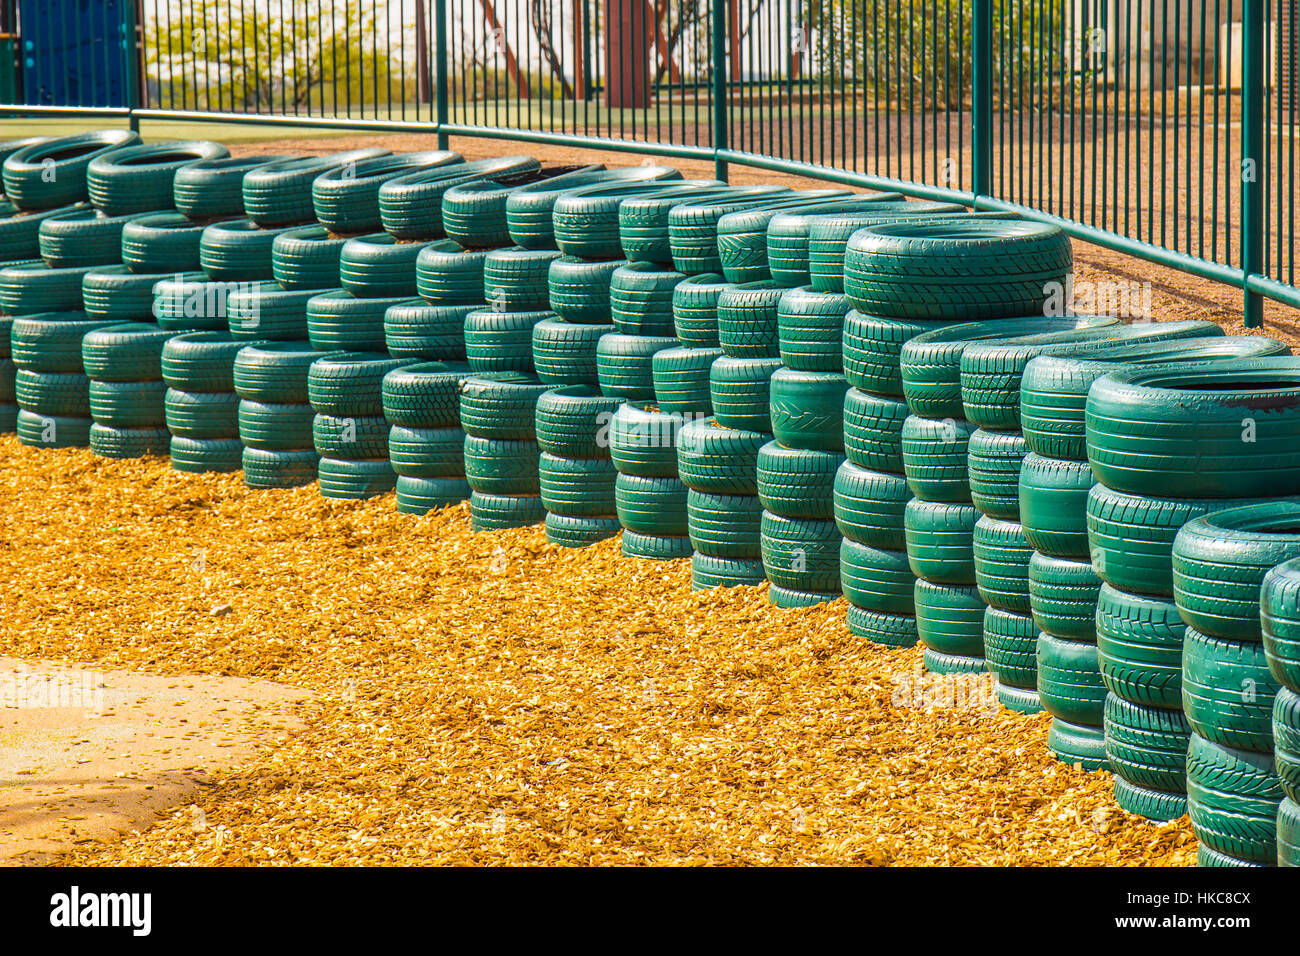 Green Rubber Tires Used As Bumpers For Small Children At Playground Stock Photo